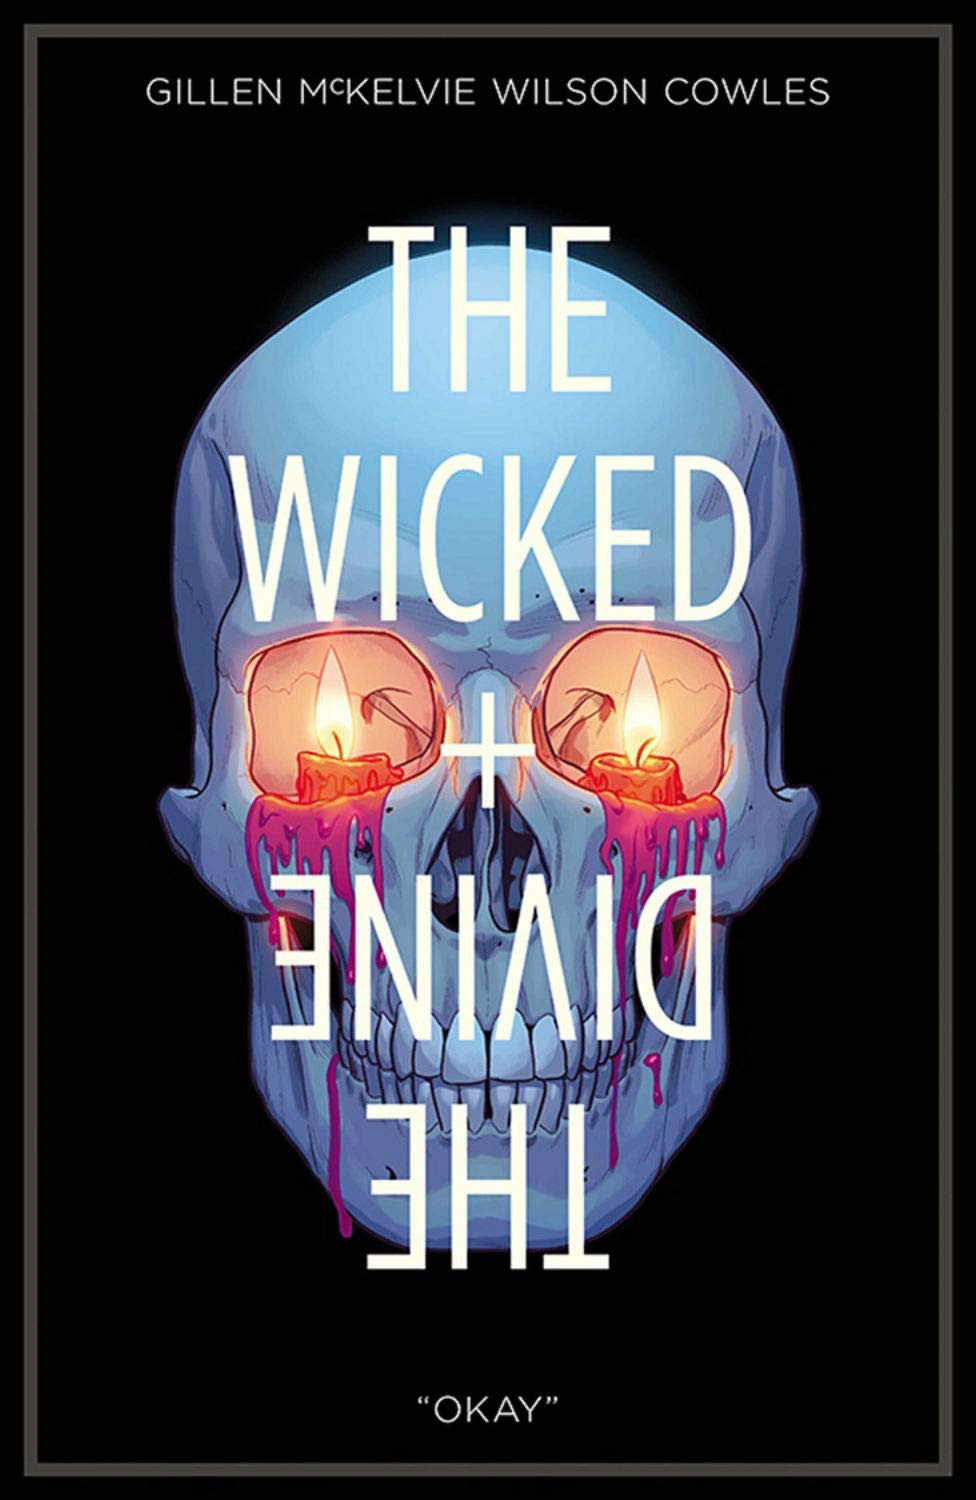 The Wicked + The Divine 9 - Okay